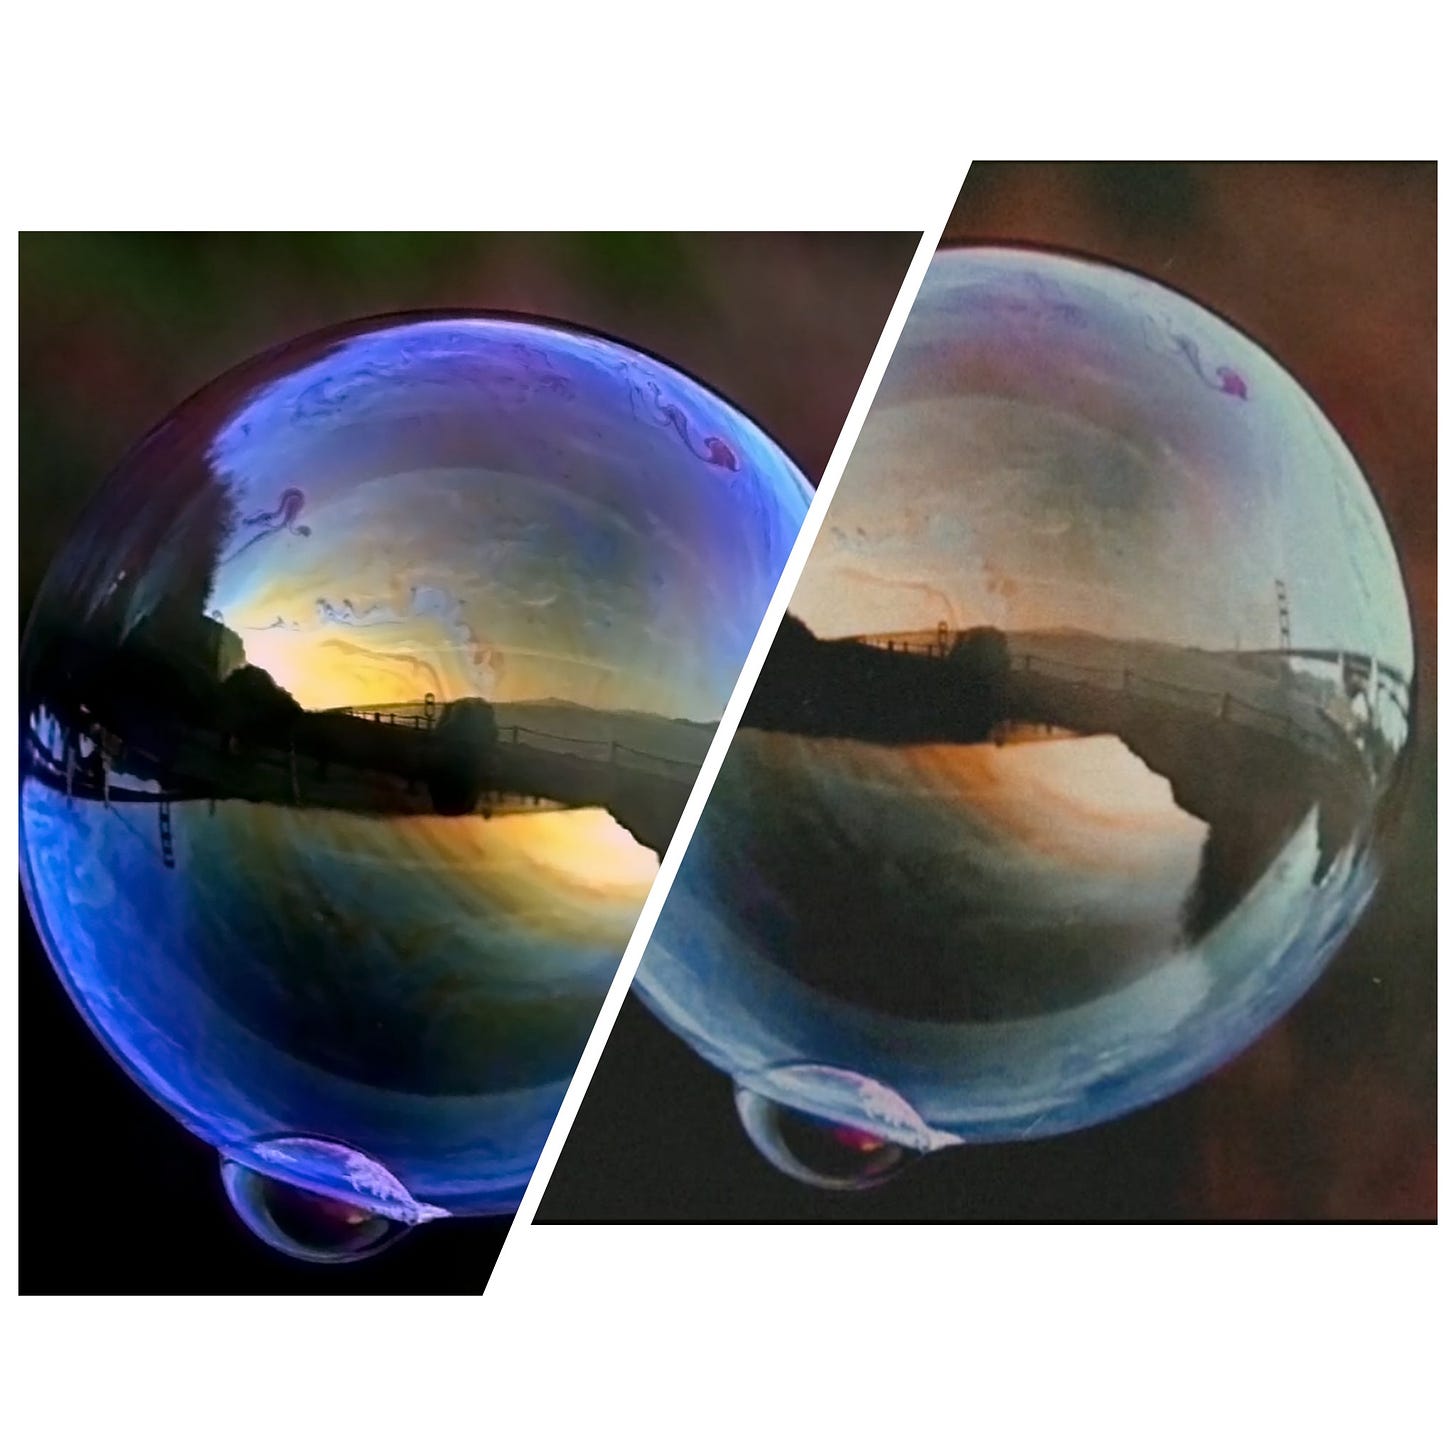 Two bubbles with little bubbles attached to them at the bottom, split in the middle with reflections of a green nature scene and varying colour schemes, the bubble on the left being more blue and the bubble on the right rusty in tinge.